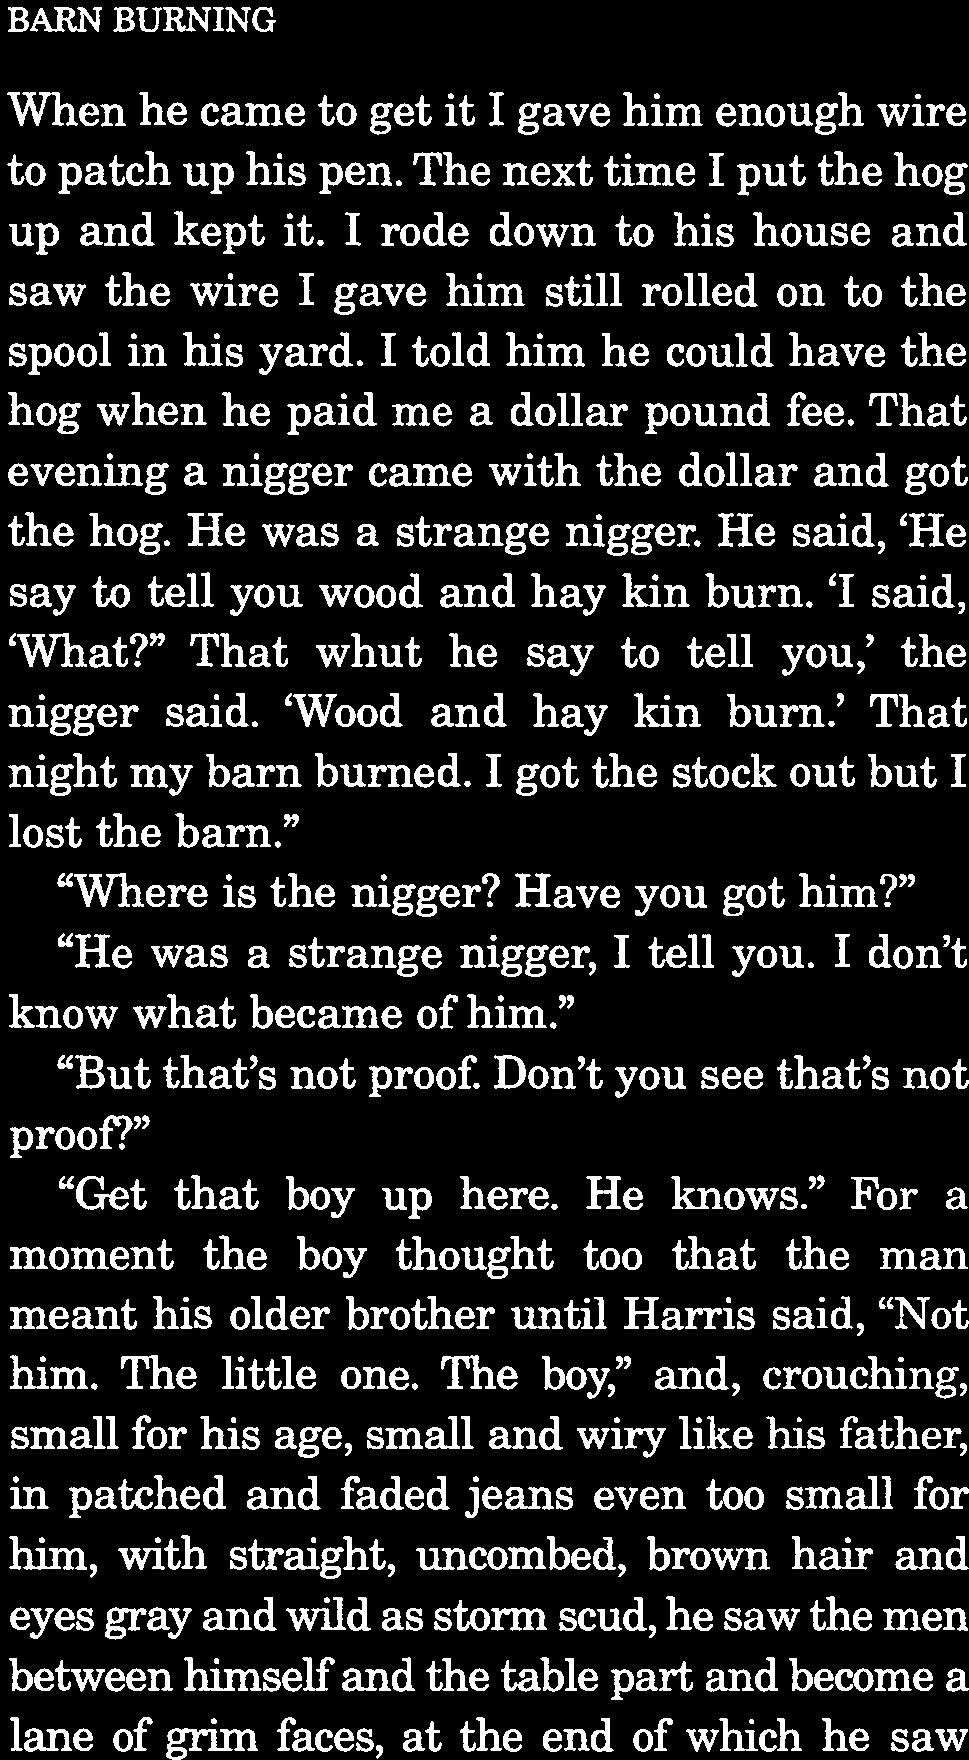 That evening a nigger came with the dollar and got the hog. He was a strange nigger. He said, He say to tell you wood and hay kin burn. I said, What? That whut he say to tell you, the nigger said.